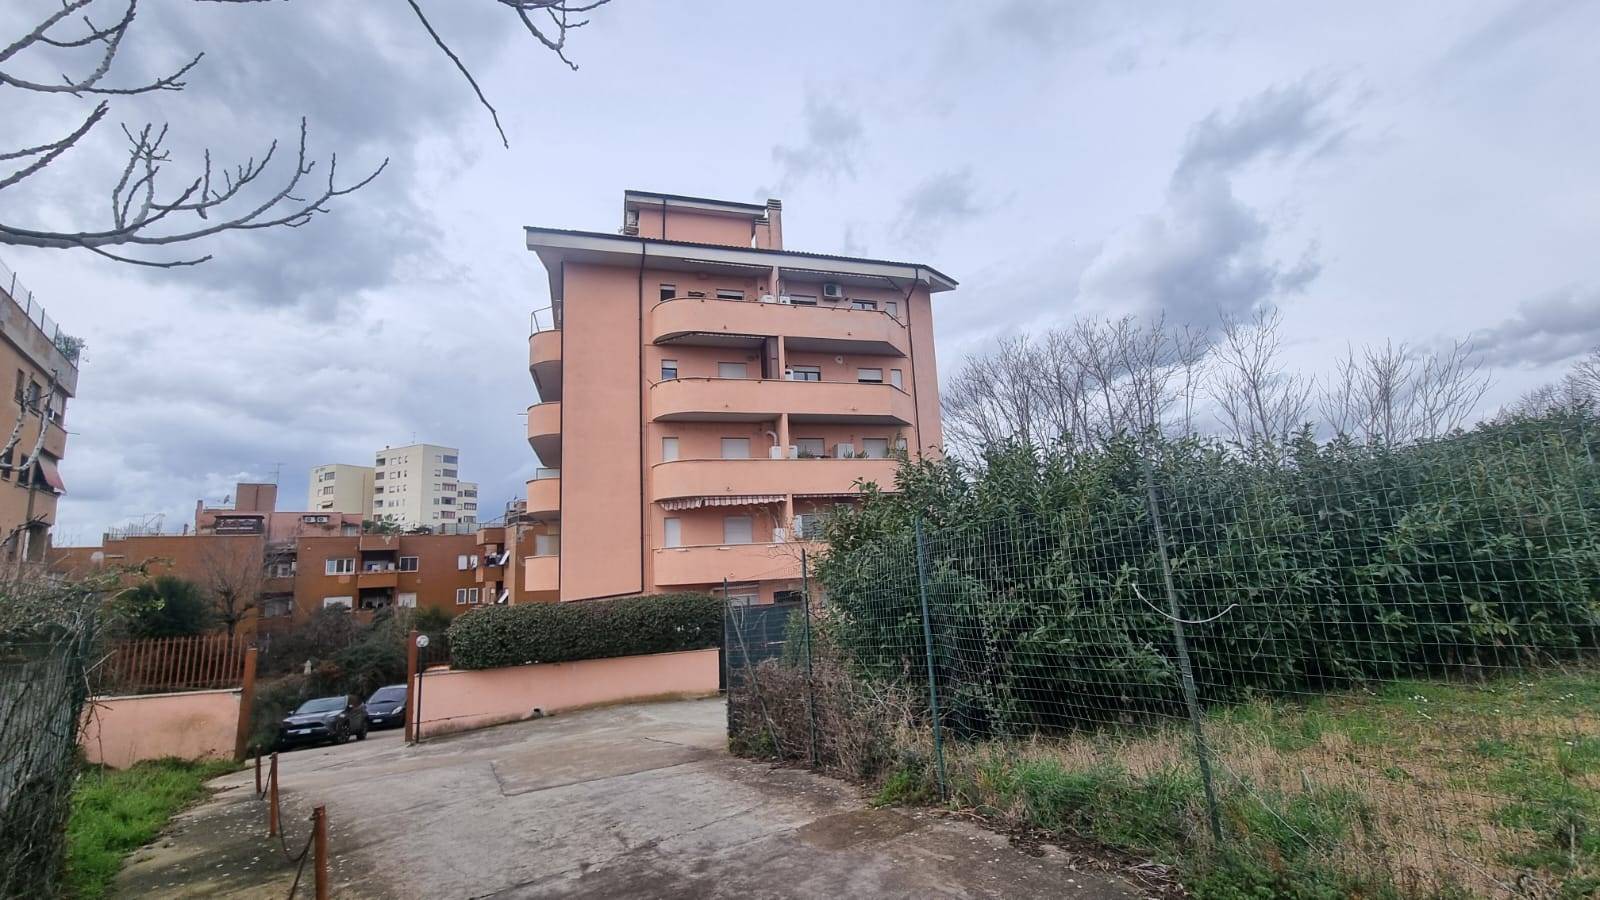 COLLE FIORITO, GUIDONIA MONTECELIO, Apartment for rent of 48 Sq. mt., Good condition, Heating Individual heating system, Energetic class: G, Epi: 175 